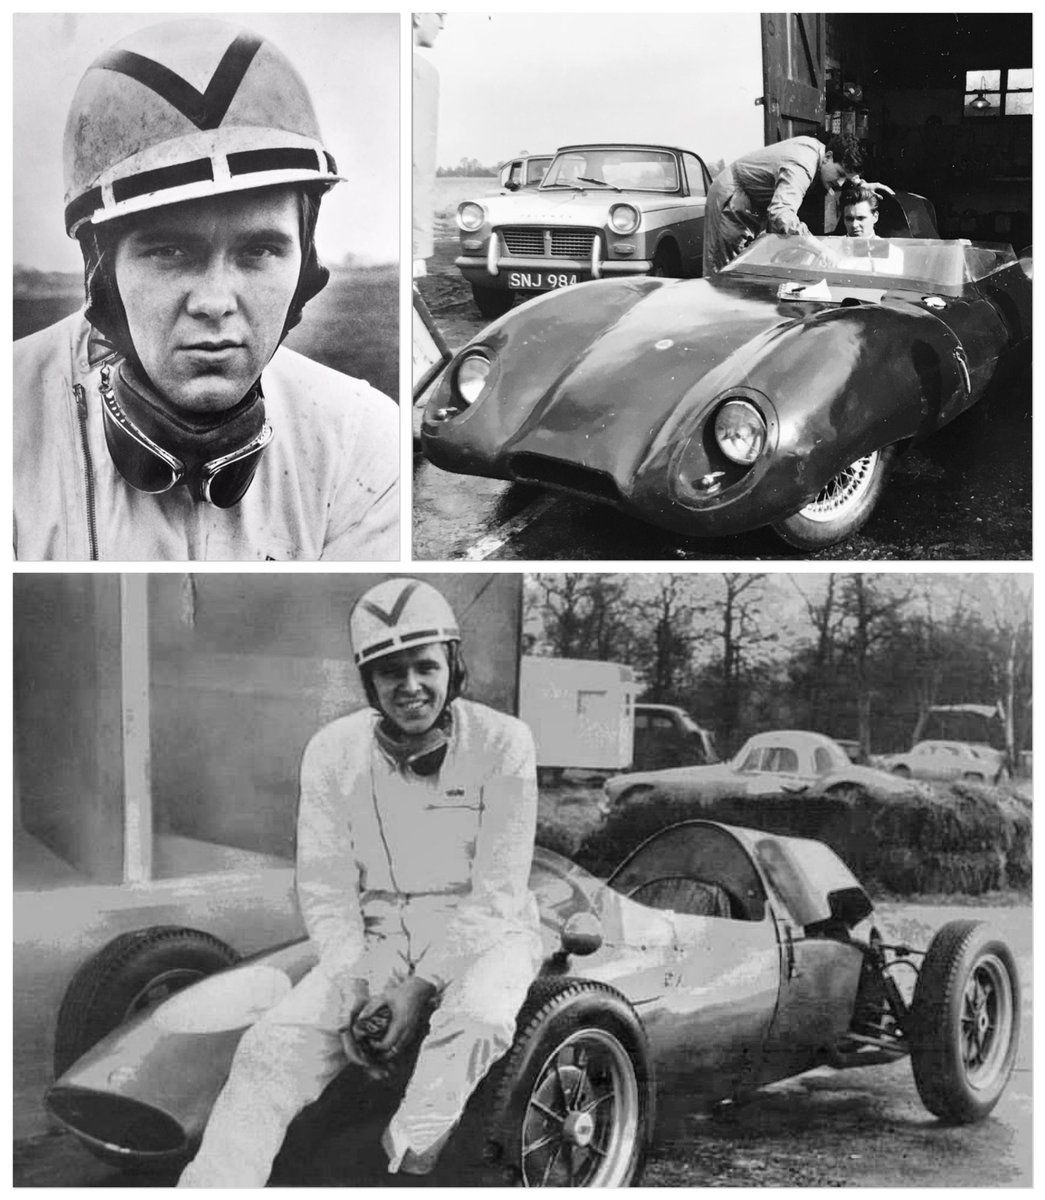 Remembering Billy Fury, legendary singer, songwriter, musician, actor and life-long petrolhead, who left us far too soon, 41 years ago today. 

📷 From a Silverstone track day in 1960. Spot Billy’s MGA, his first car, in the main photo.

#BillyFury @BillyFuryMuseum